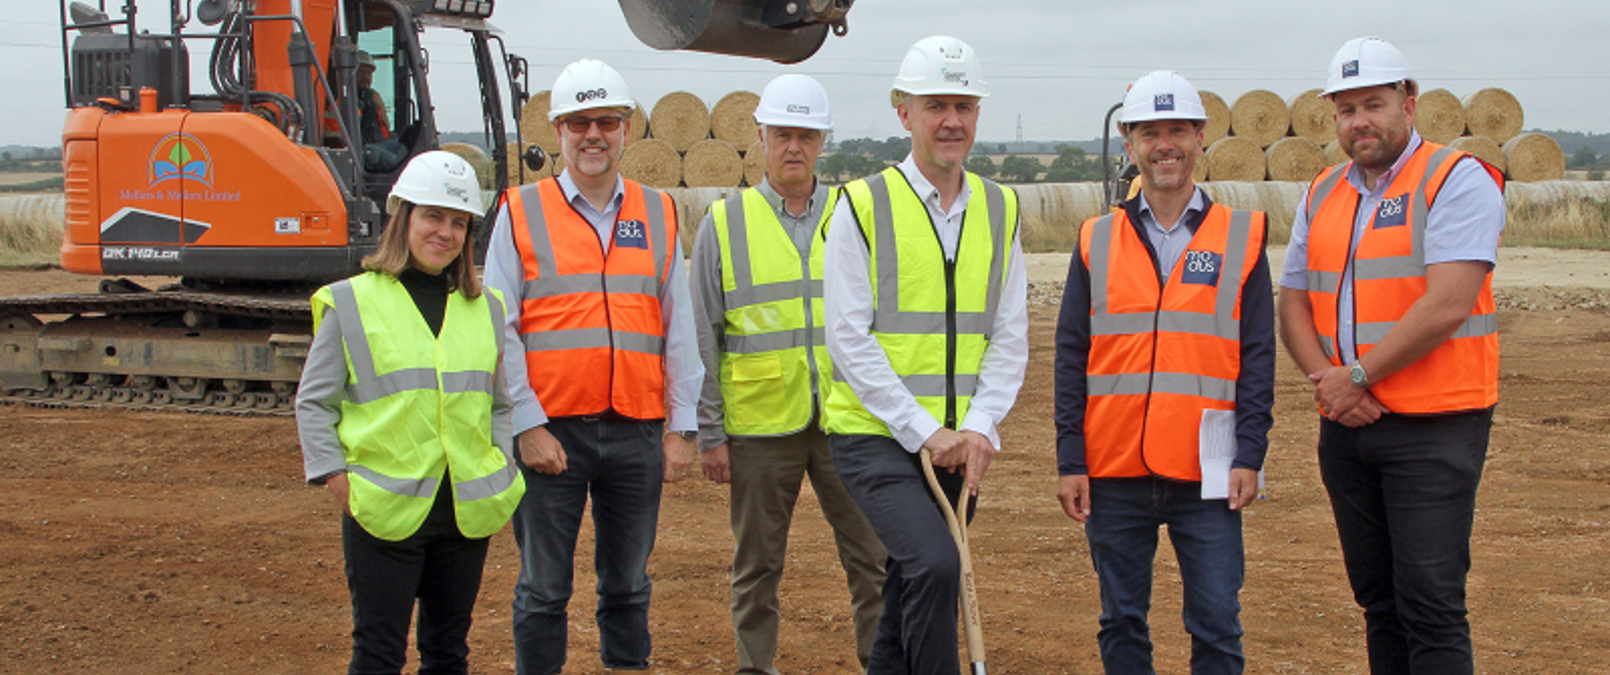 Colleagues On New Development Site